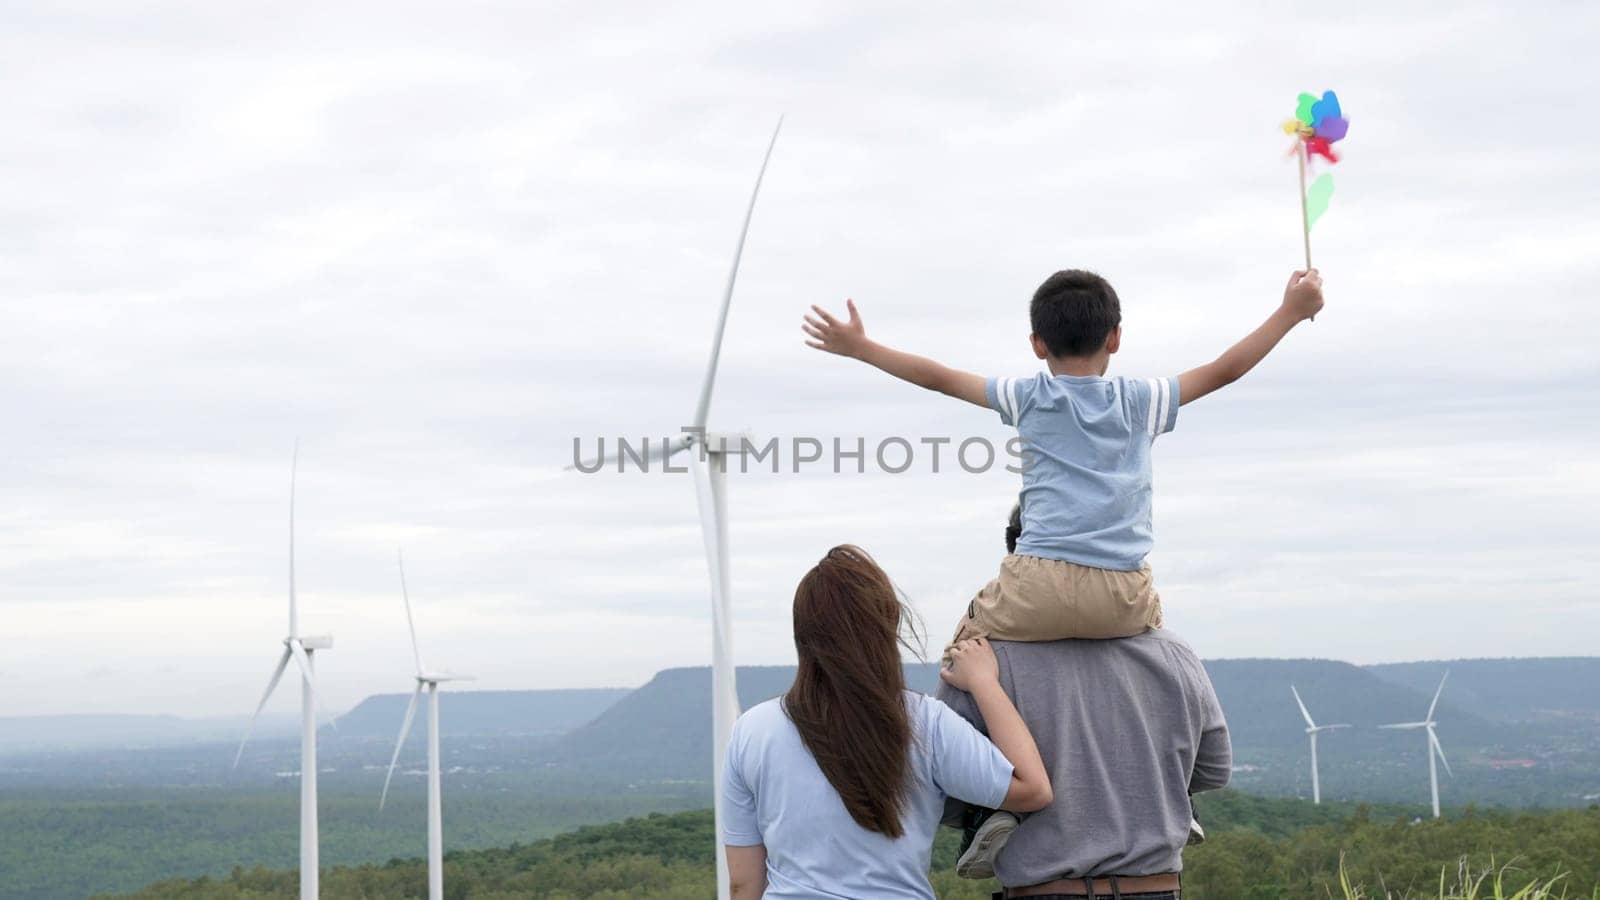 Concept of progressive happy family enjoying their time at the wind turbine farm by biancoblue